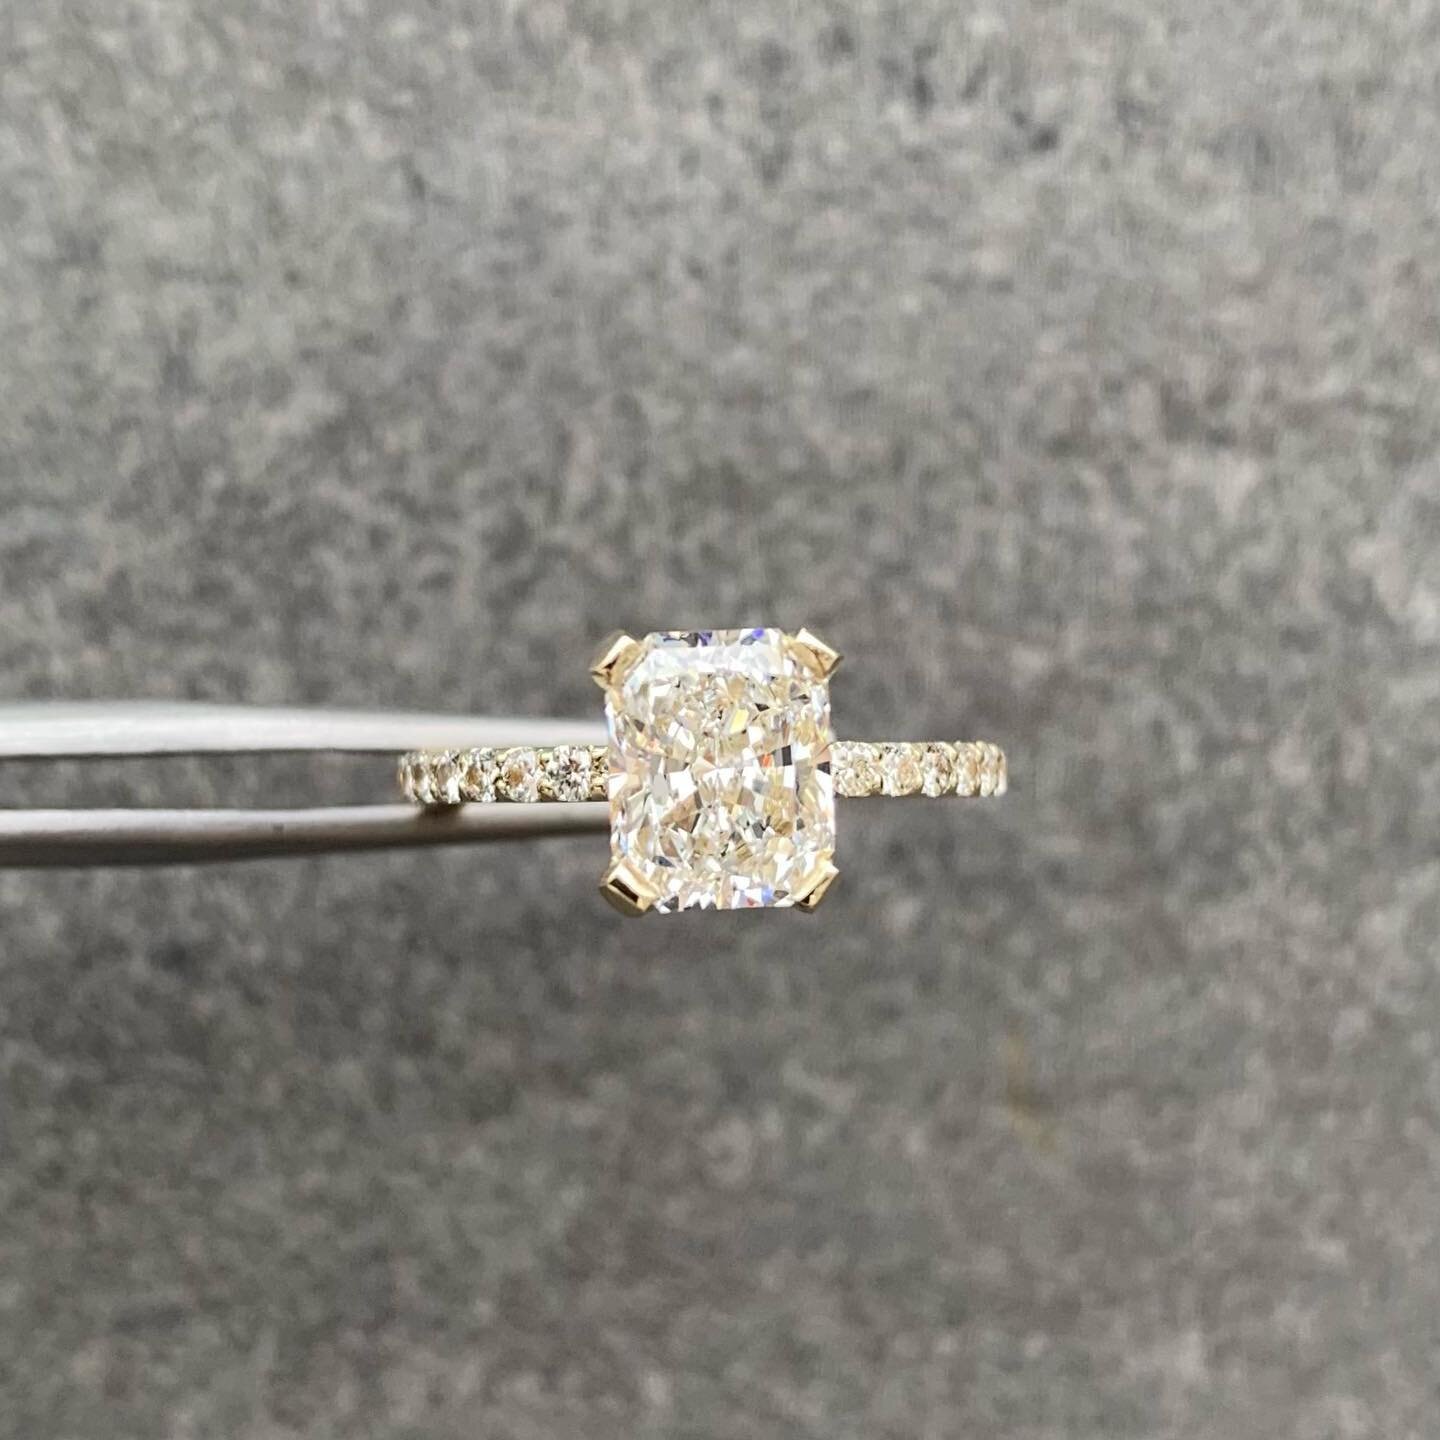 Responsibly sourced GIA certified diamond  Handcrafted in New York
Shape: Radiant
Size: 1.61ct
Color: E Color
Clarity: VS2
&mdash;
🧞&zwj;♂️: @magnoliajewelers
&mdash;
𝐝𝐫𝐞𝐚𝐦 𝐢𝐭. 𝐰𝐞'𝐥𝐥 𝐦𝐚𝐤𝐞 𝐢𝐭.
&mdash;
#custom #custommade #customcraft